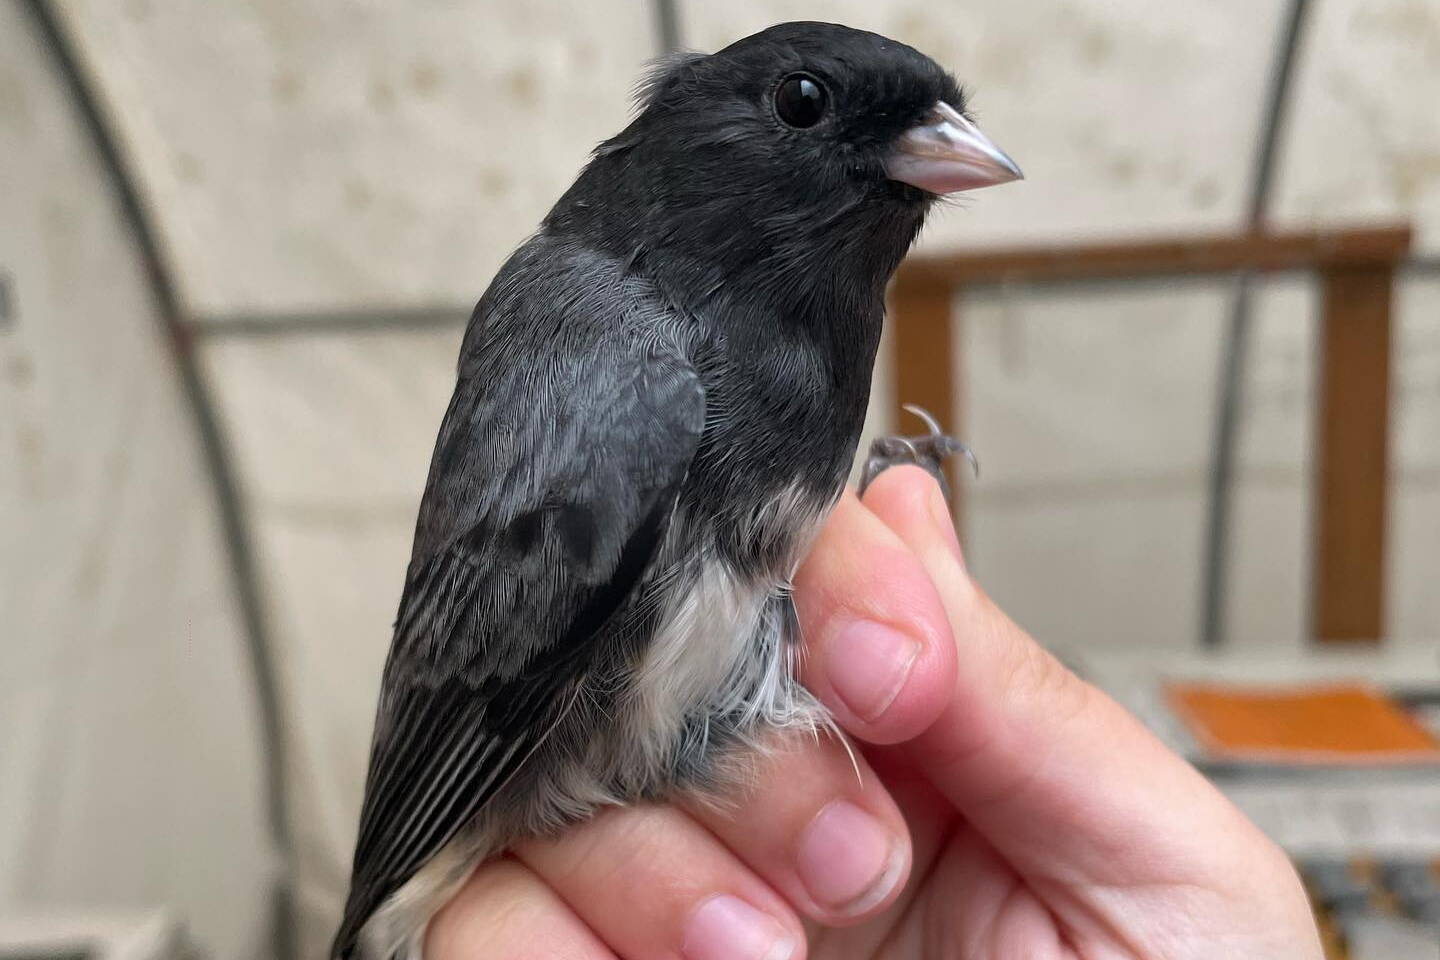 A slate-colored junco awaits release back into the forest after biologists at Creamer’s Field Migration Station noted it was their 2,000th songbird capture of the season. (Photo courtesy of Alaska Songbird Institute)